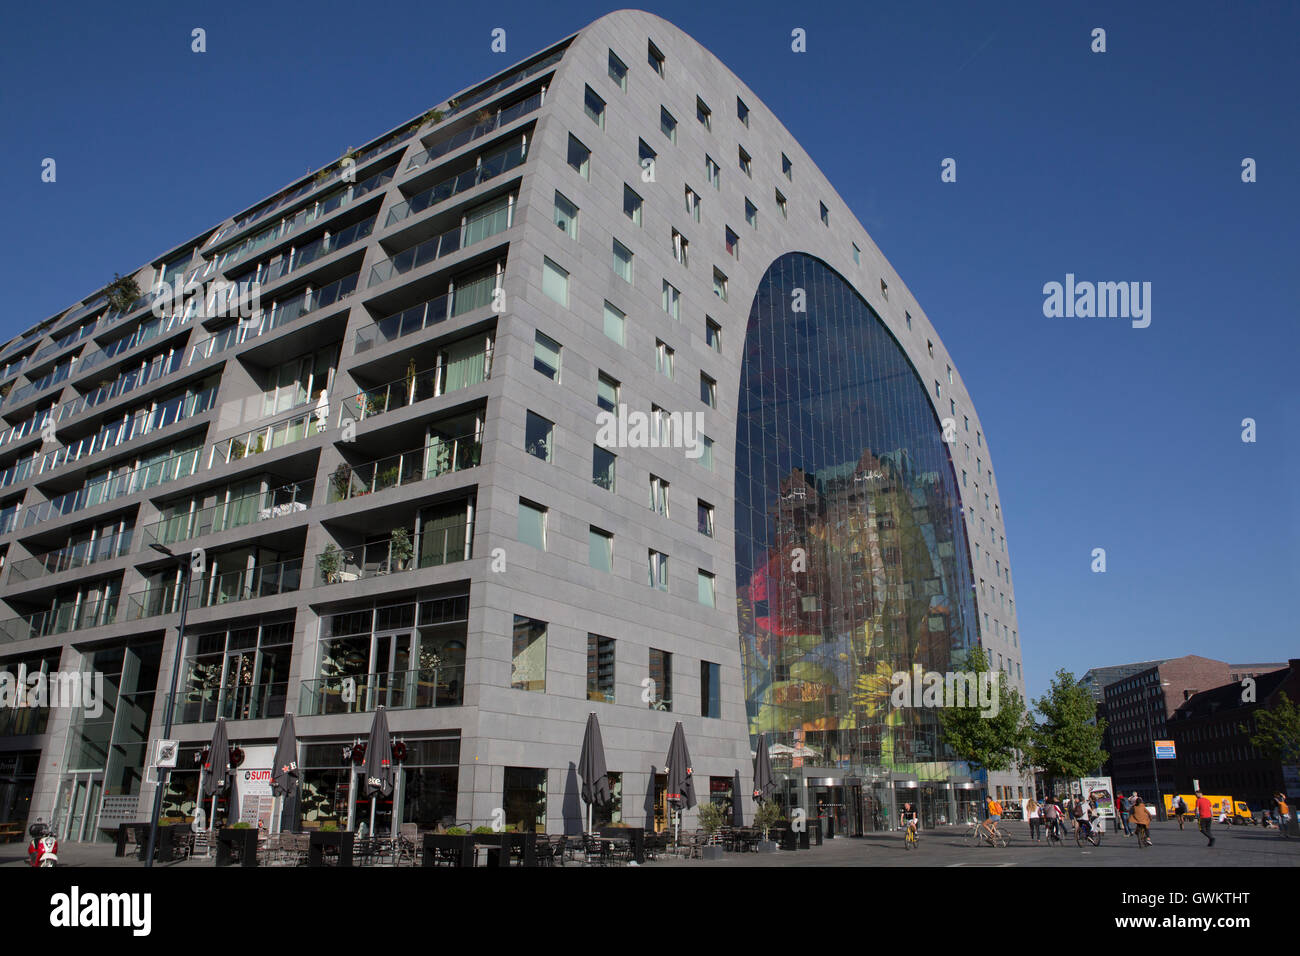 The Markthal in Rotterdam, the Netherlands. Stock Photo